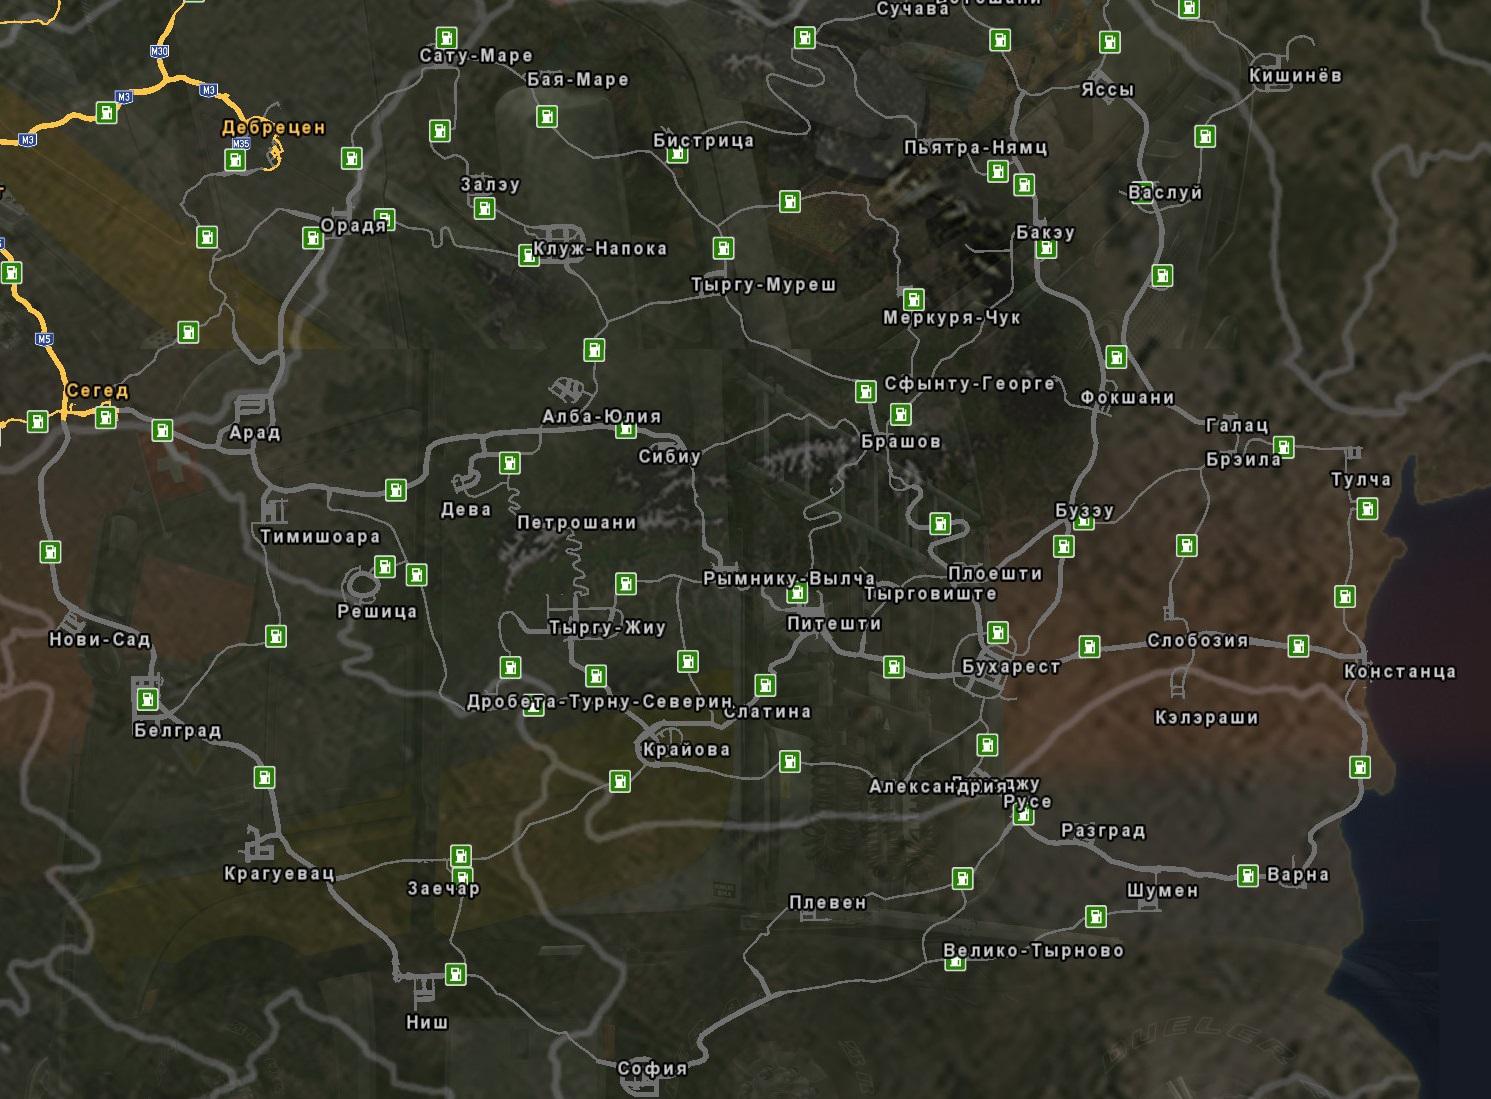 Russian City Names For The Map Of Romania V 1 7 Allmods Net - russian city map new version out read desc roblox